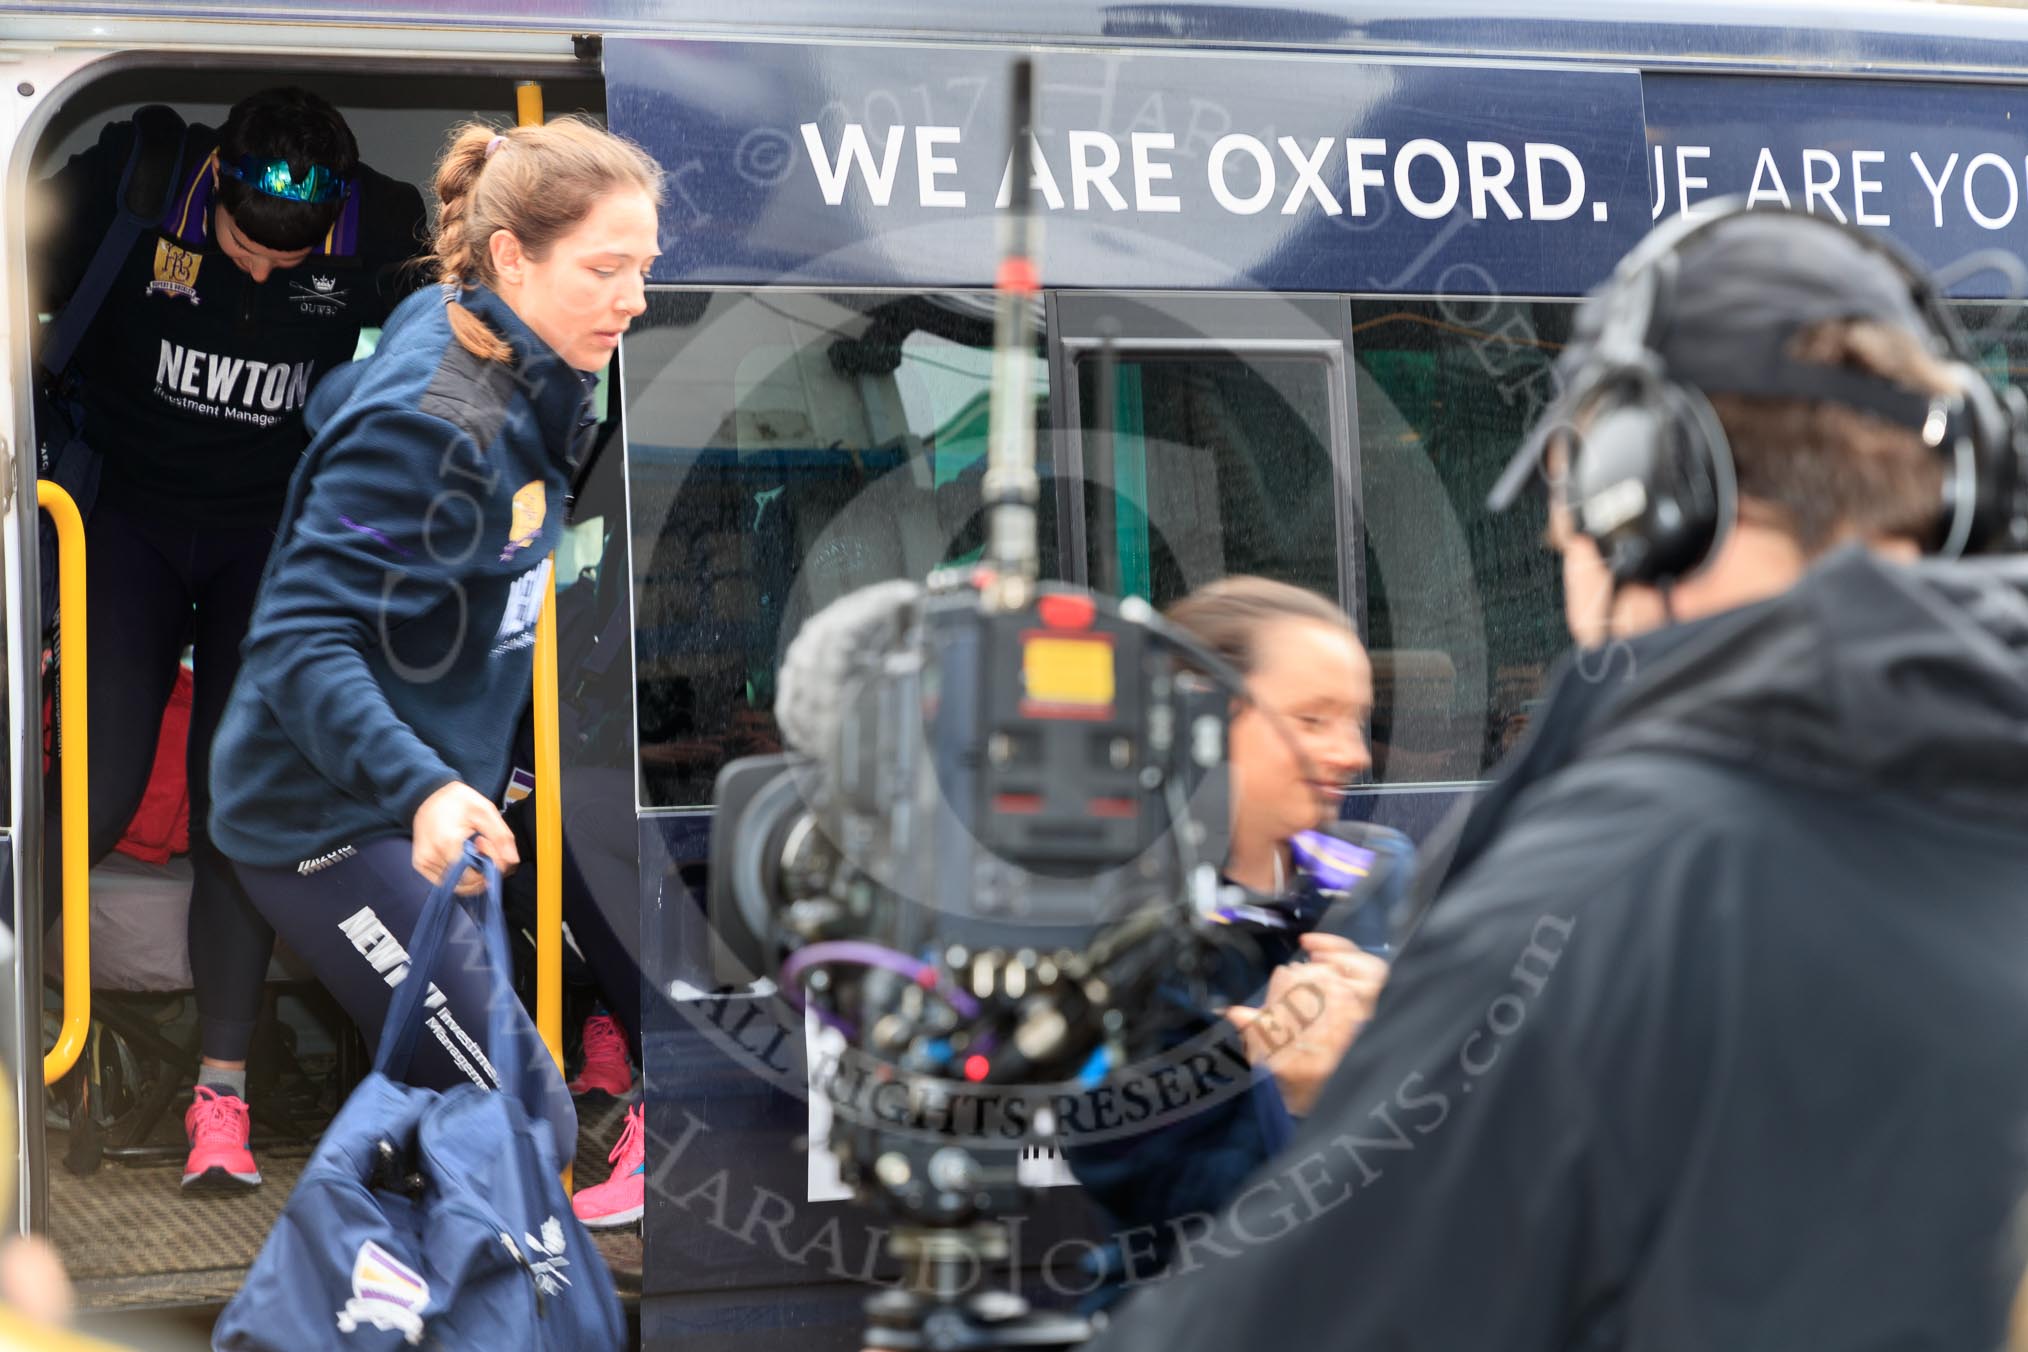 The Cancer Research UK Women's Boat Race 2018: The arrival of the Oxford women, here 7 seat Abigail Killen, and behind her 4 seat Alice Roberts.
River Thames between Putney Bridge and Mortlake,
London SW15,

United Kingdom,
on 24 March 2018 at 14:11, image #21